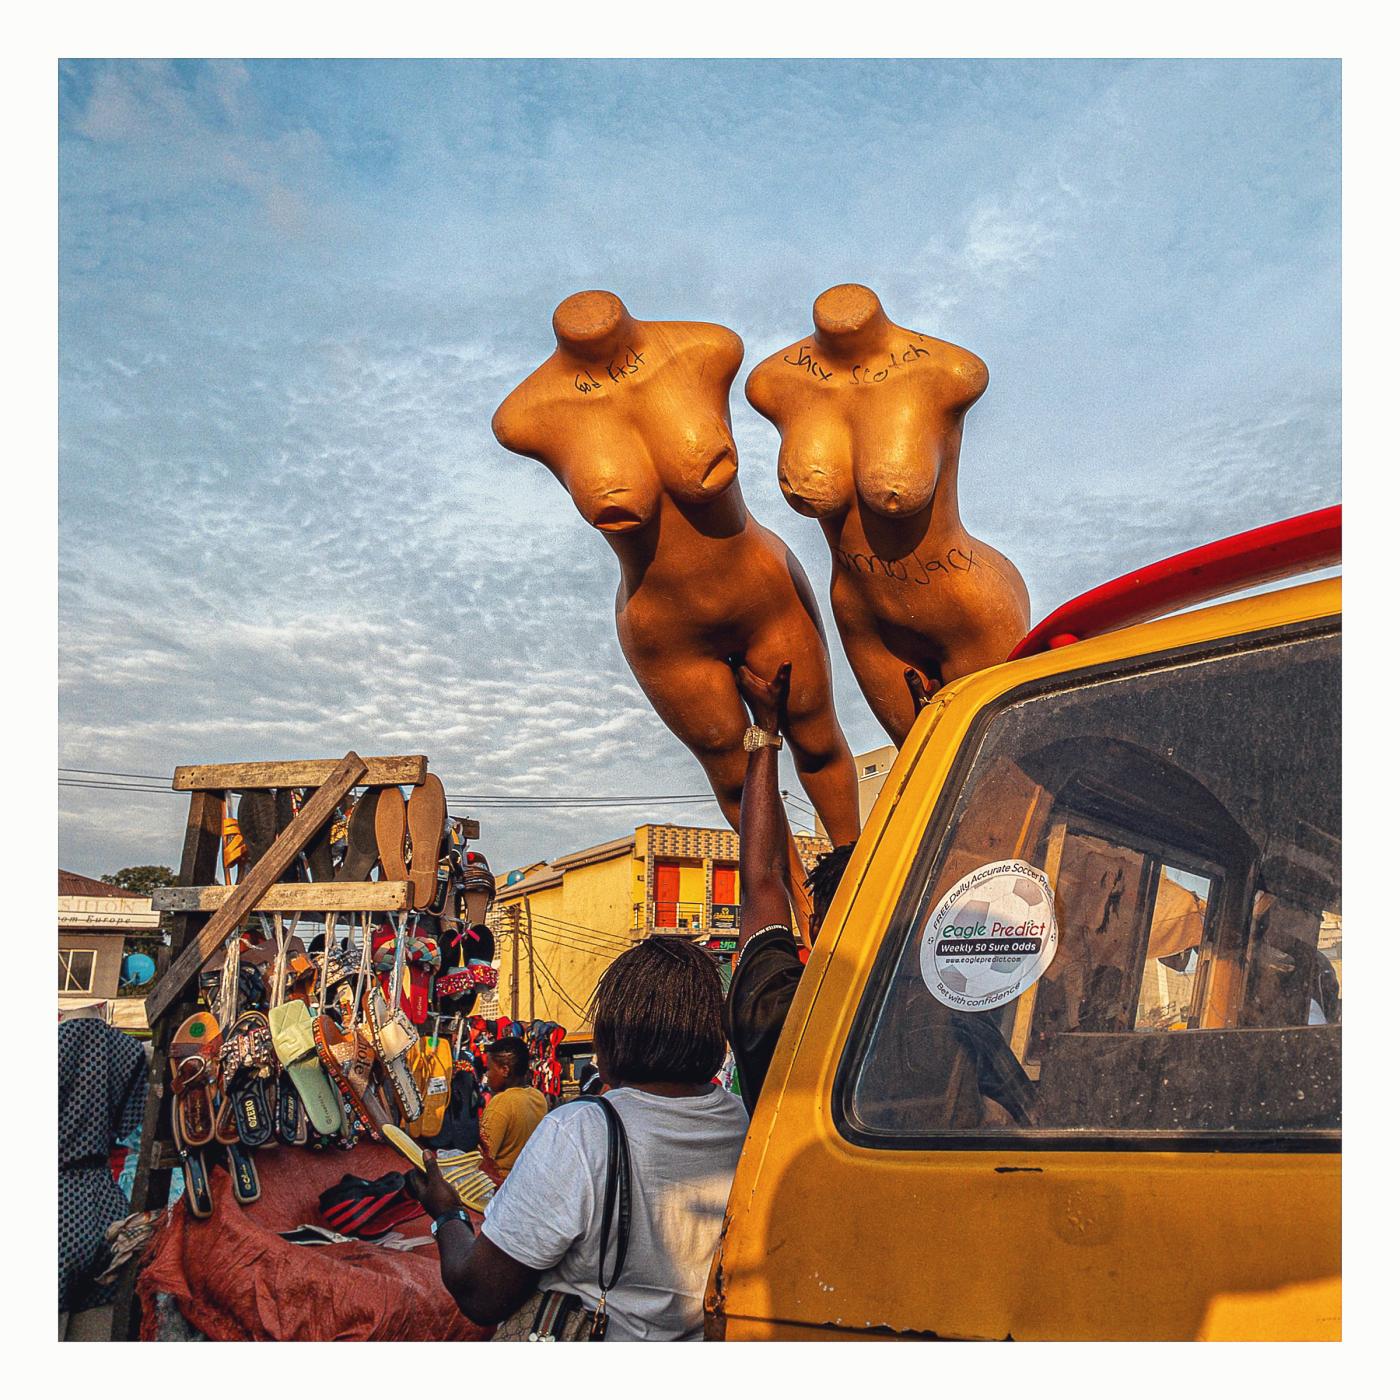 LagosLivesOn: Two mannequins and the soul of Nigeria’s megacity